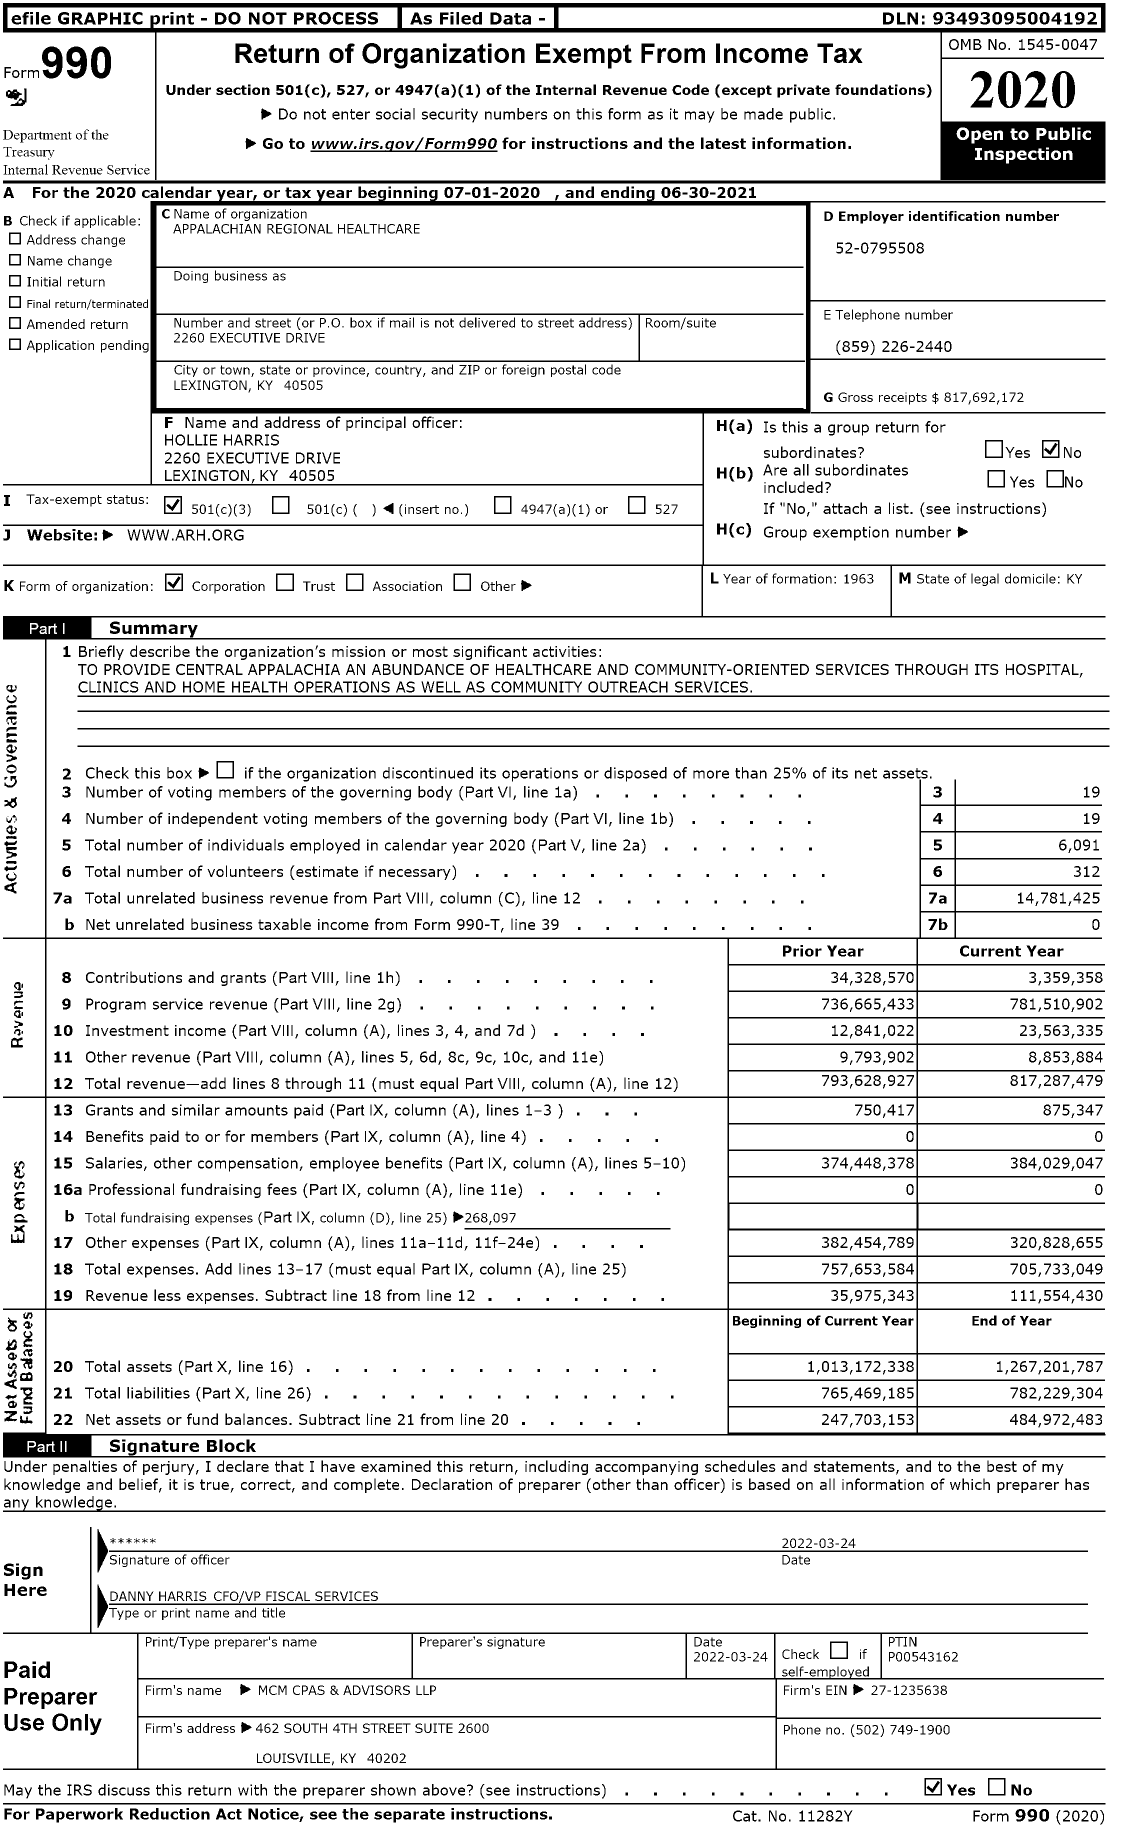 Image of first page of 2020 Form 990 for Appalachian Regional Healthcare (ARH)